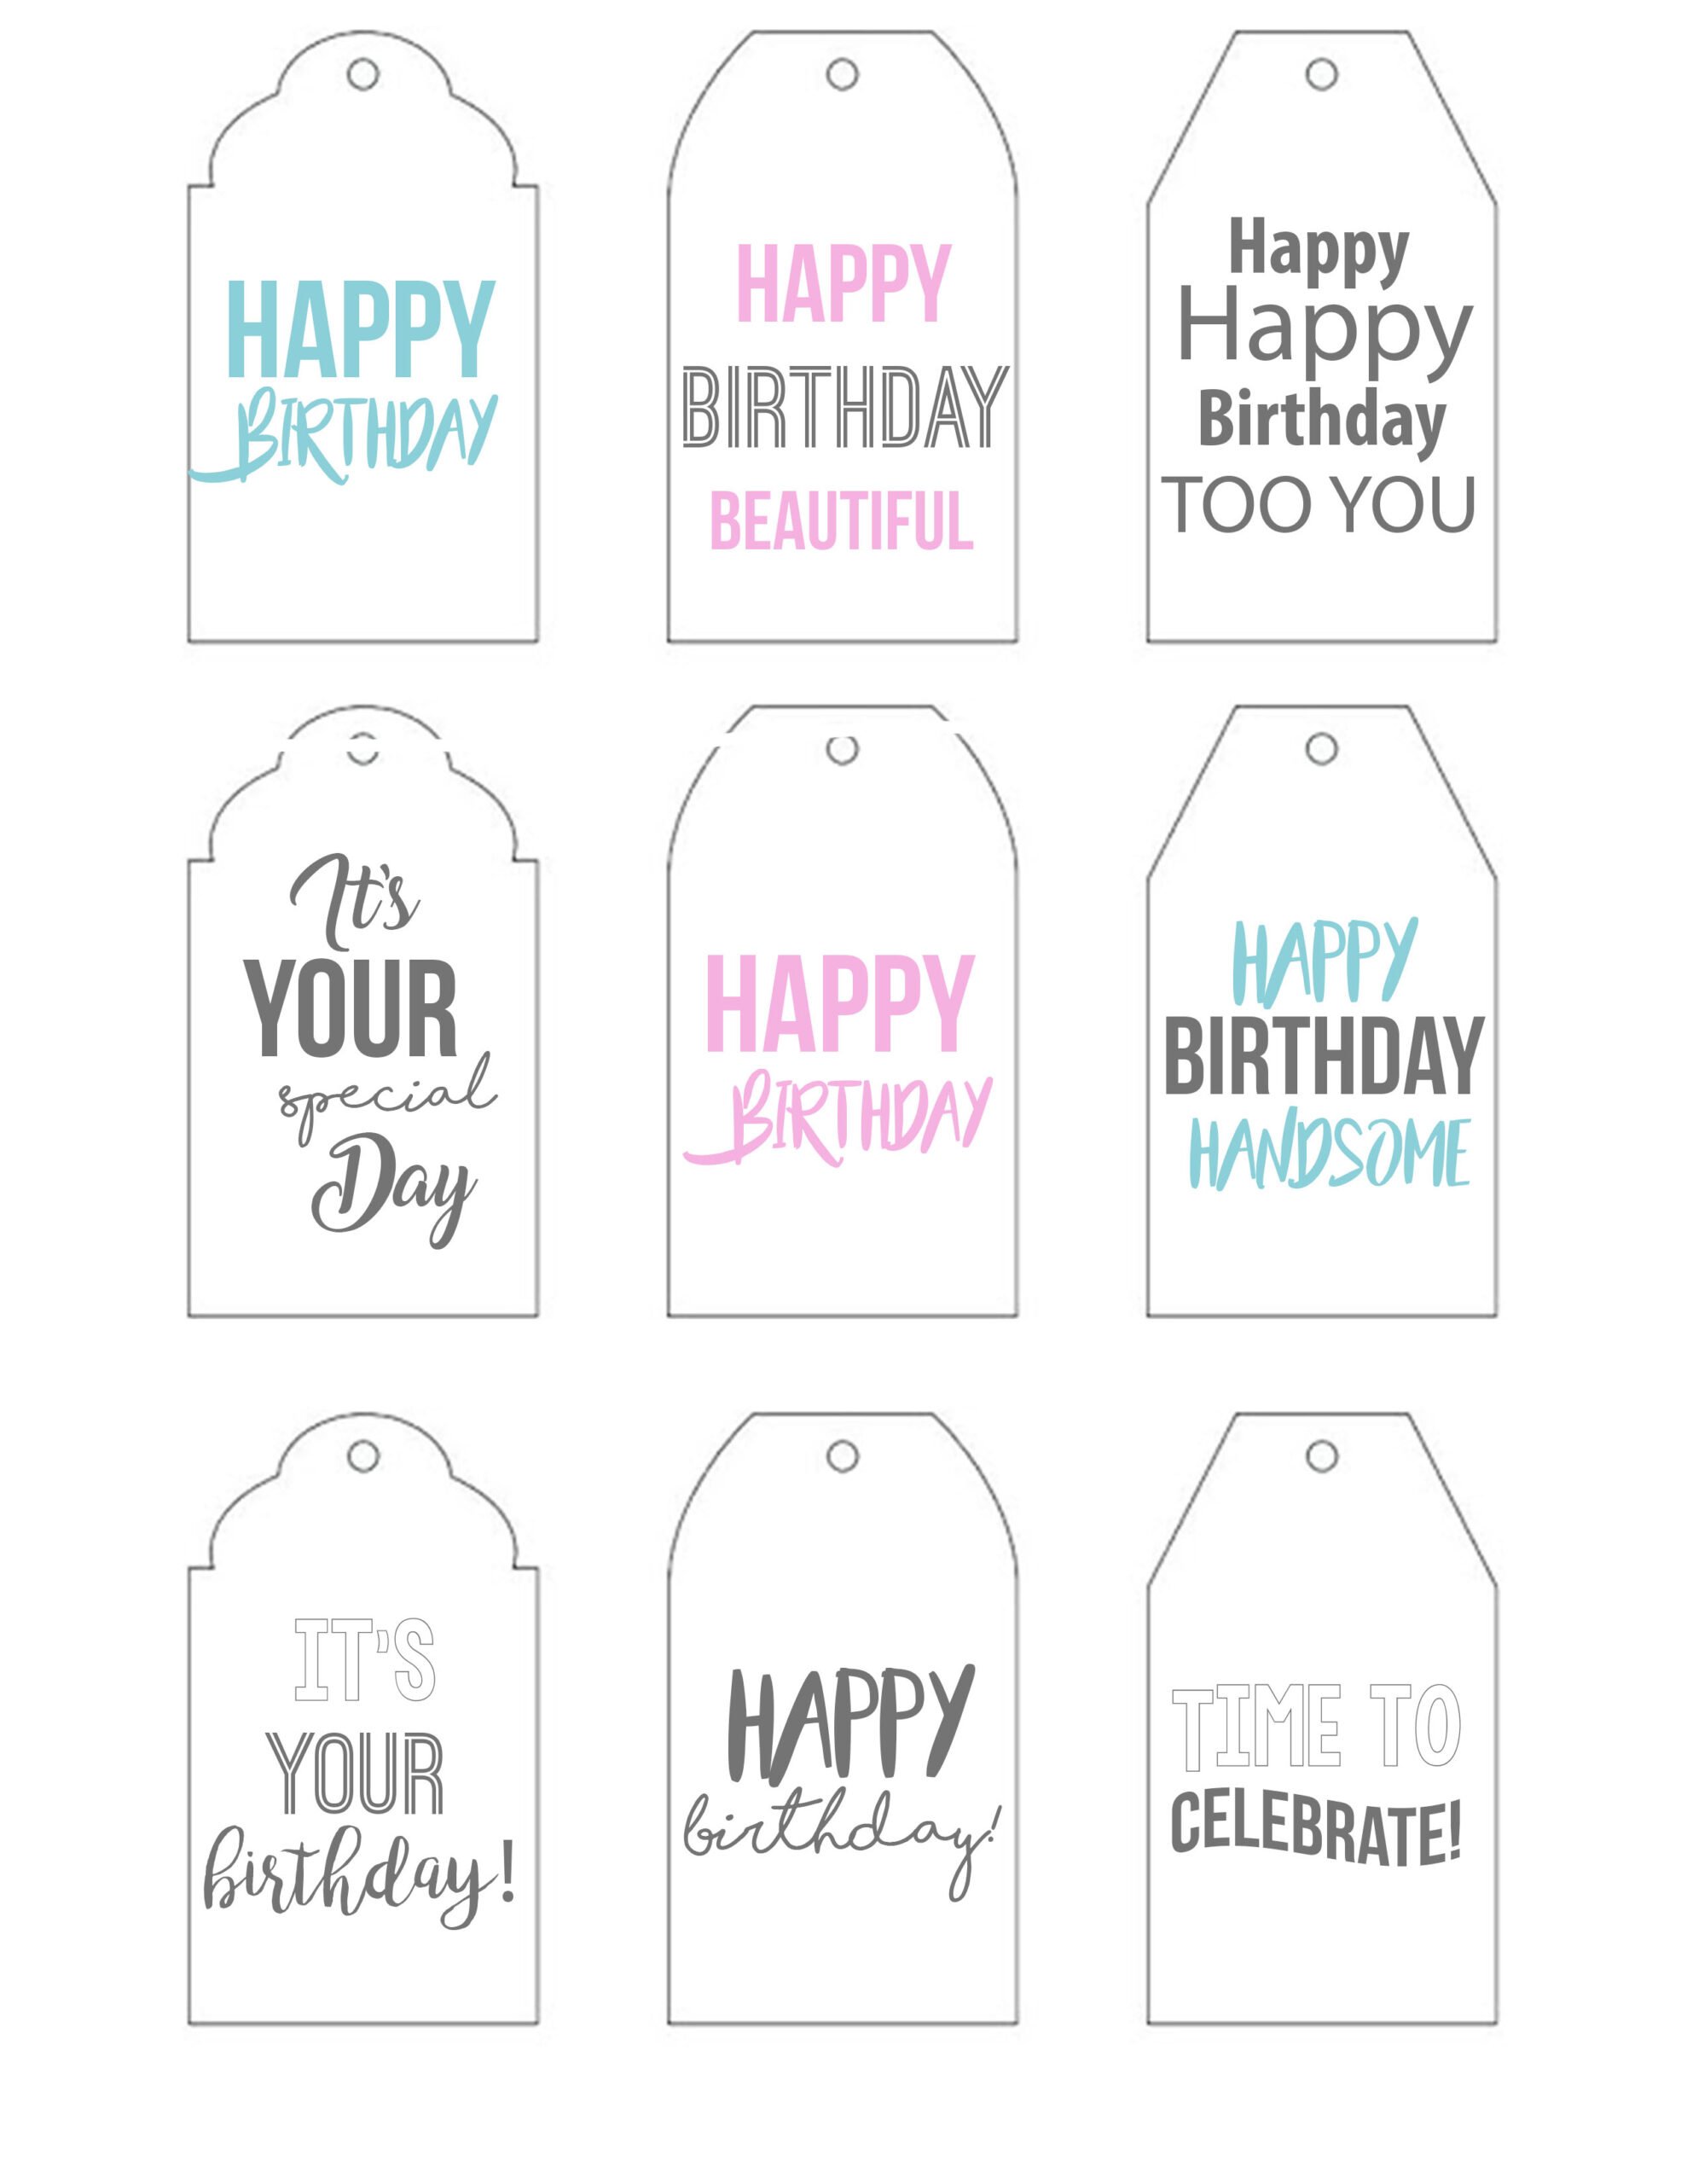 Free Printable Happy Birthday Tags; easy print and cut out gift tags for that perfect birthday present! Minimal ink used! #freeprintables #happybirthdaytags